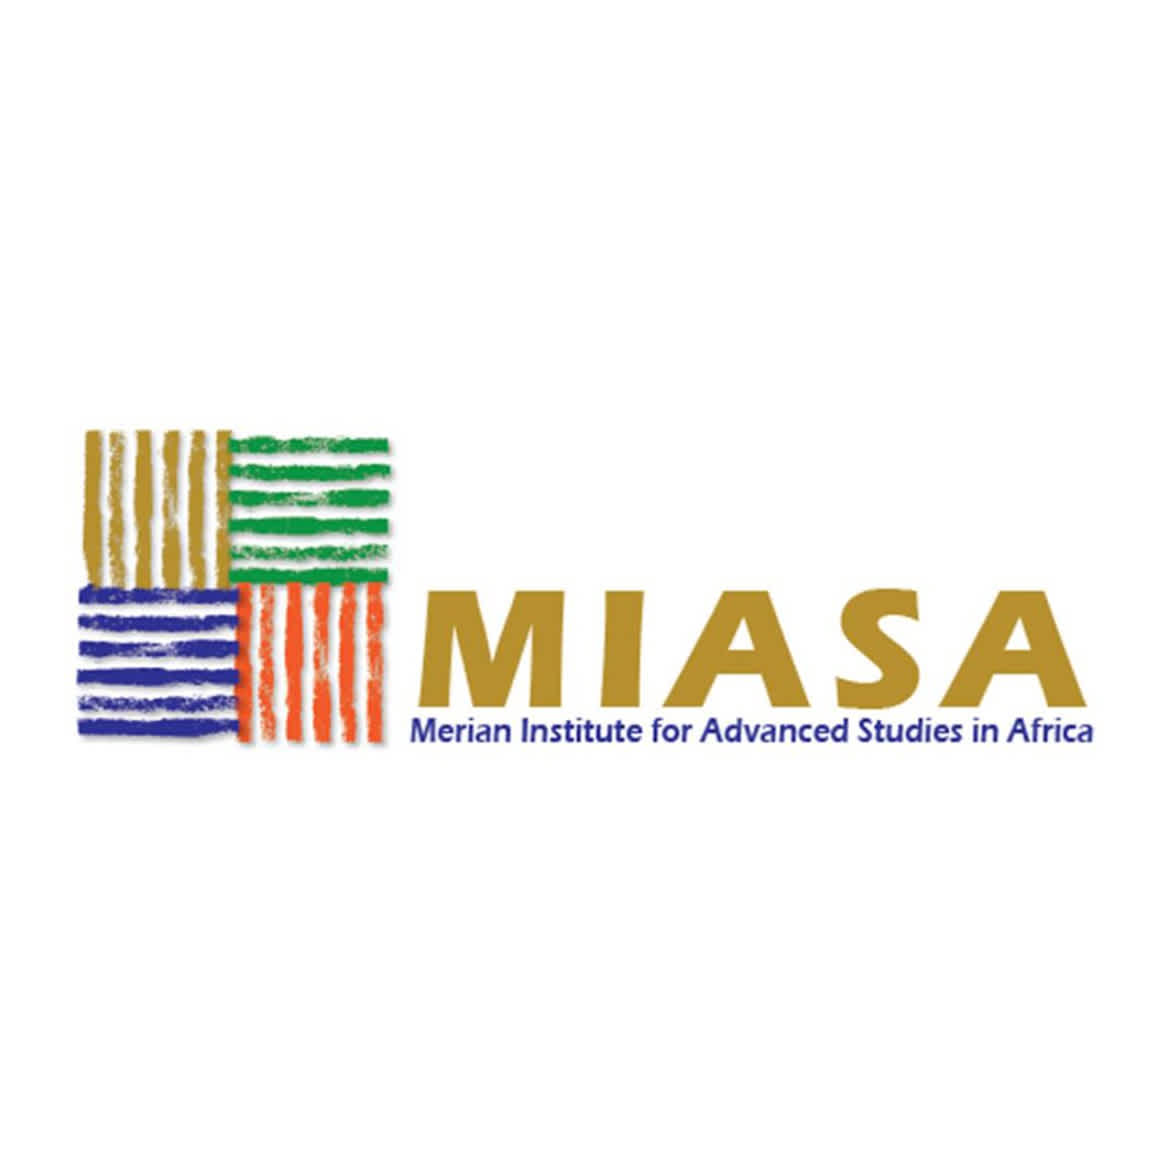 Call for Papers and Organised Sessions: MIASA Policy Conference “Accelerating Africa’s economic transformation towards shared prosperity and sustainability”